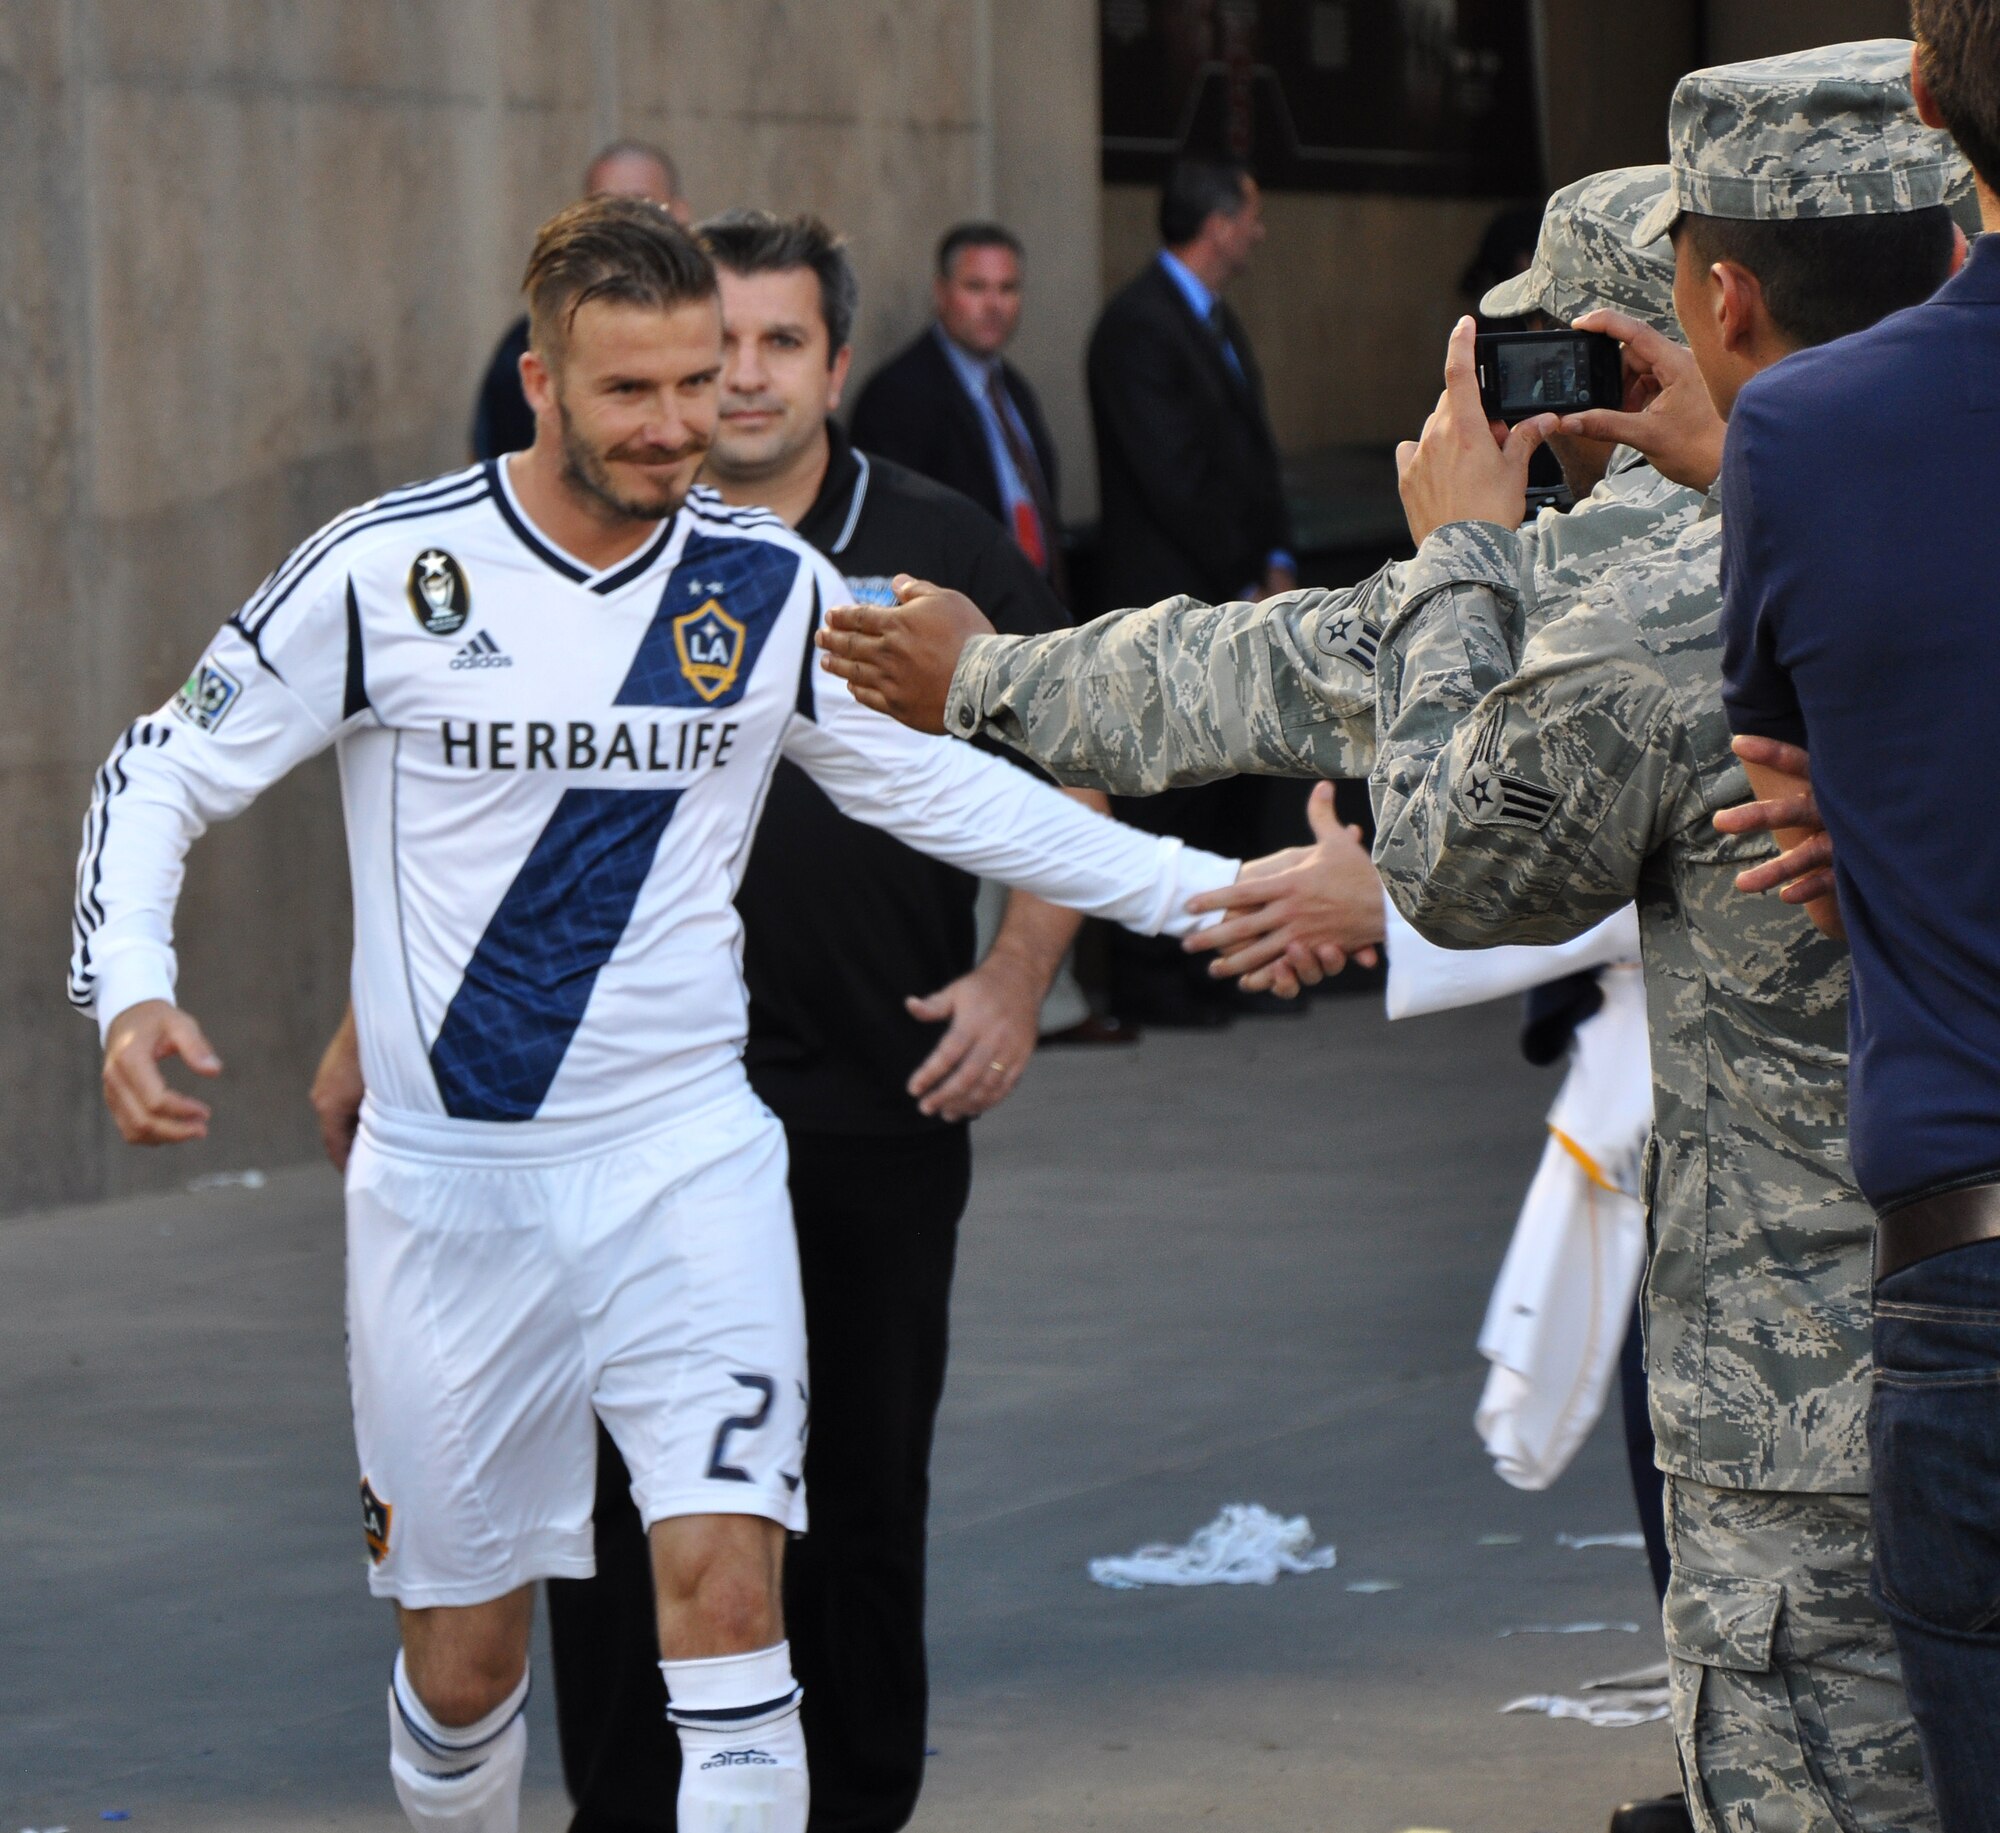 David Beckham, L.A. Galaxy midfielder, shakes the hands of U.S. servicemembers during the start of the second half of the L.A. Galaxy versus San Jose Earthquakes soccer game at Stanford Stadium, Stanford, Calif., June 30, 2012. More than 300 servicemembers participated in a halftime show that honored America’s troops. (U.S. Air Force photo by Staff Sgt. Robert M. Trujillo/Released)